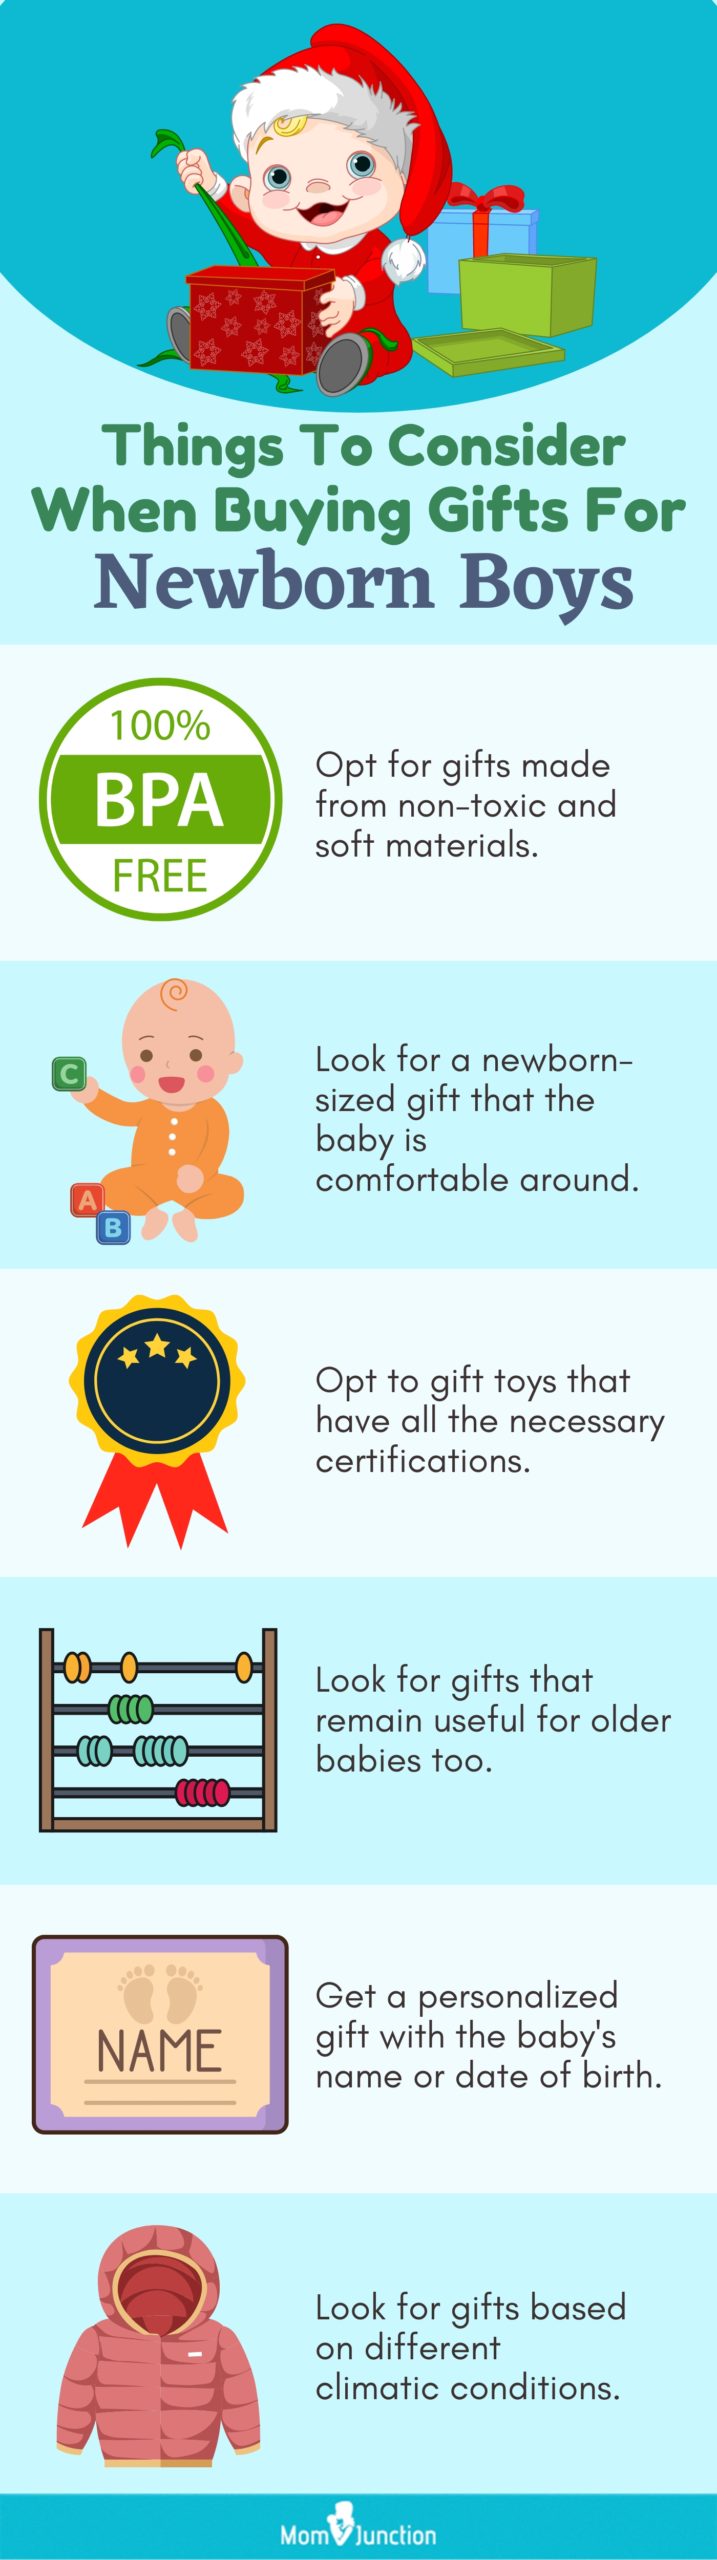 https://www.momjunction.com/wp-content/uploads/2023/01/Things-To-Consider-When-Buying-Gifts-For-Newborn-Boys-scaled.jpg